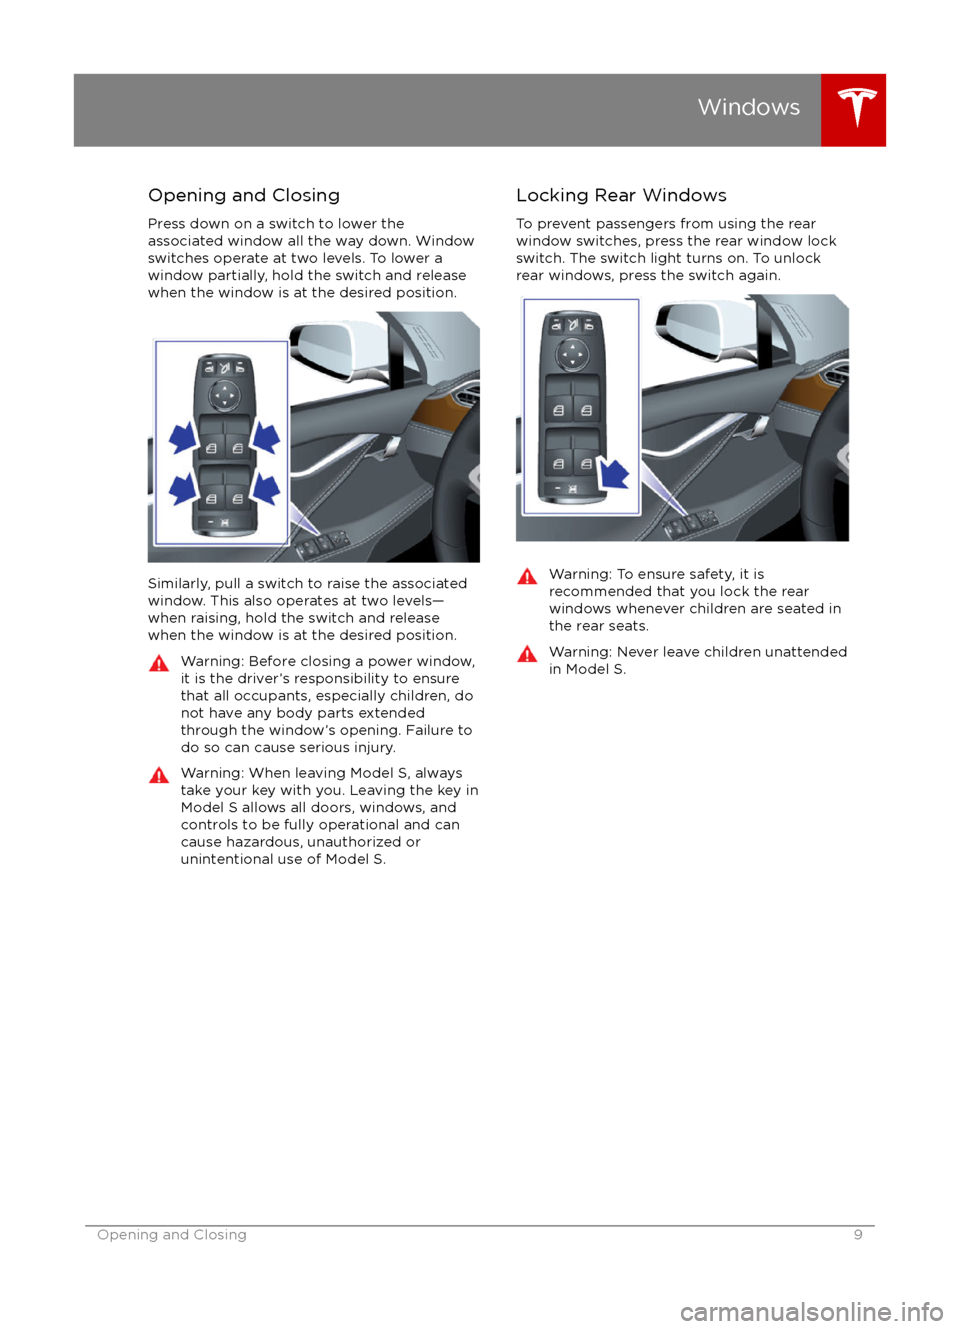 TESLA MODEL S 2016  Owners Manual Opening and Closing
Press down on a switch to lower the
associated window all the way down. Window
switches operate at two levels. To lower a
window partially, hold the switch and release
when the win